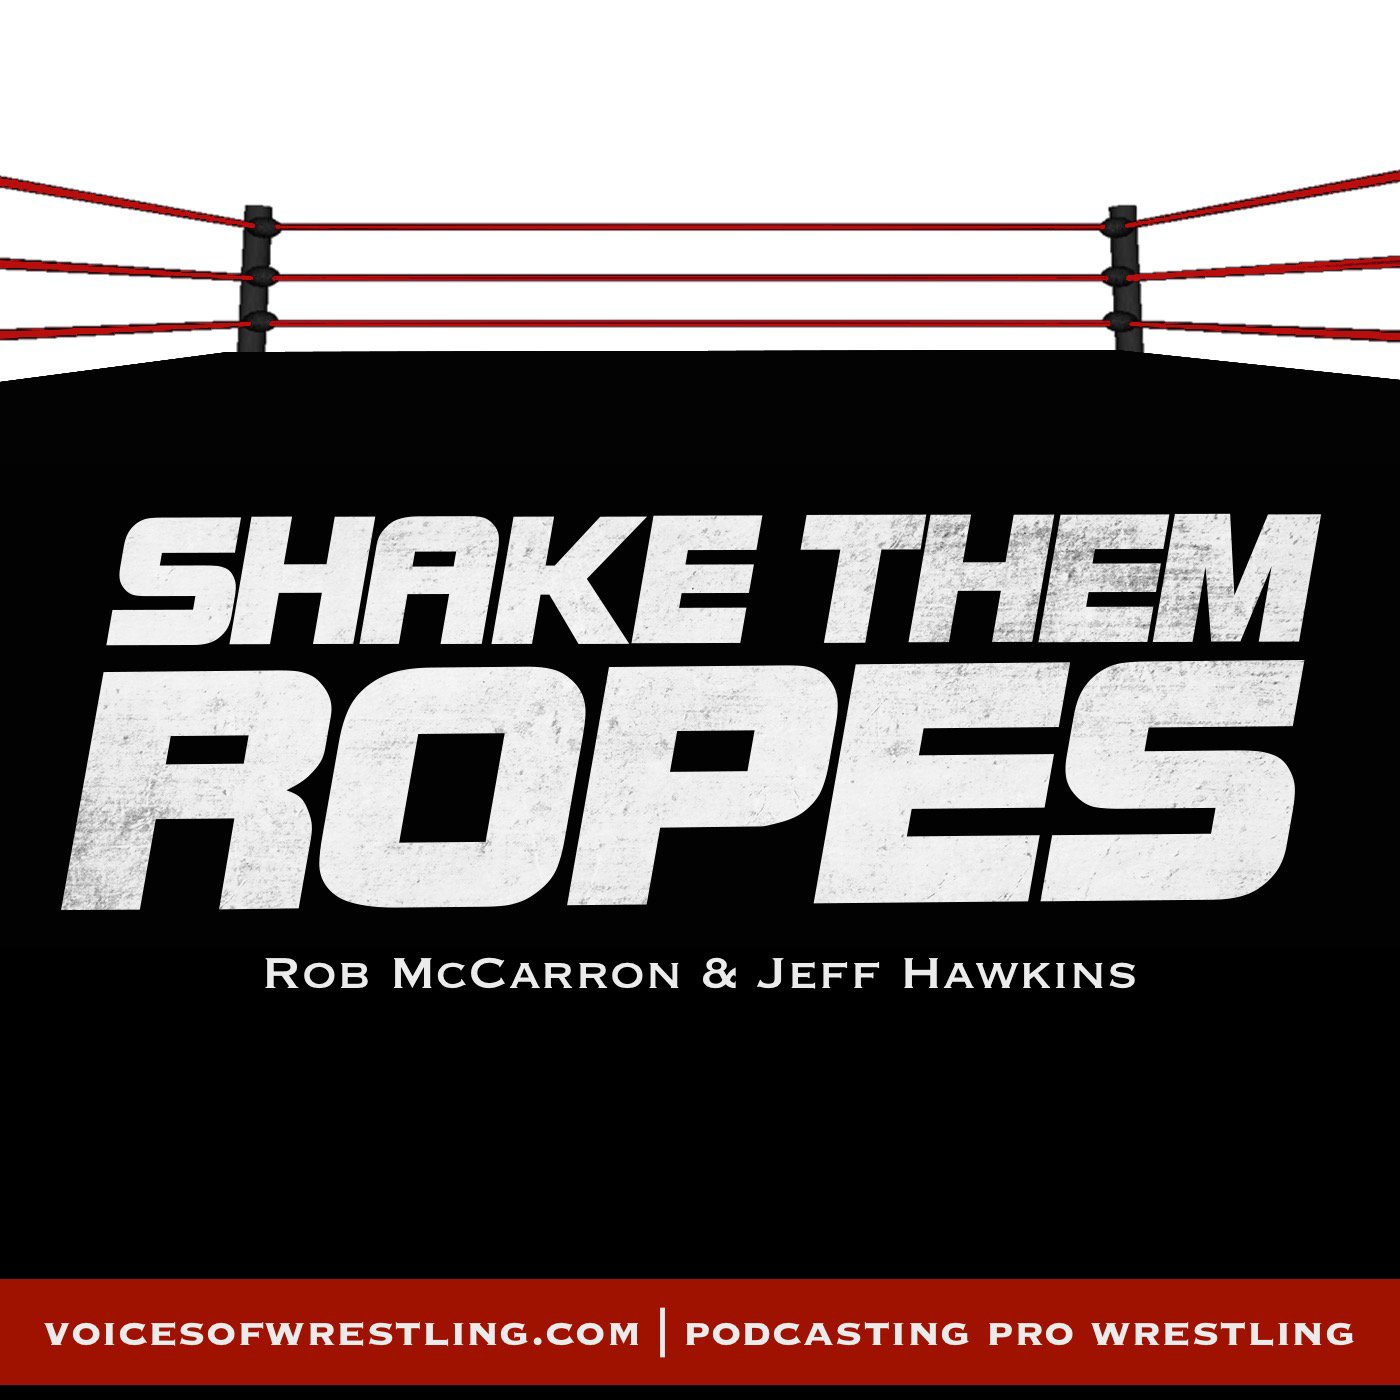 podcast on @voiceswrestling network w/ @Crapgame13 @chrisnovembrino and sometimes @RobfromIndiana
https://t.co/TigLUmPmii